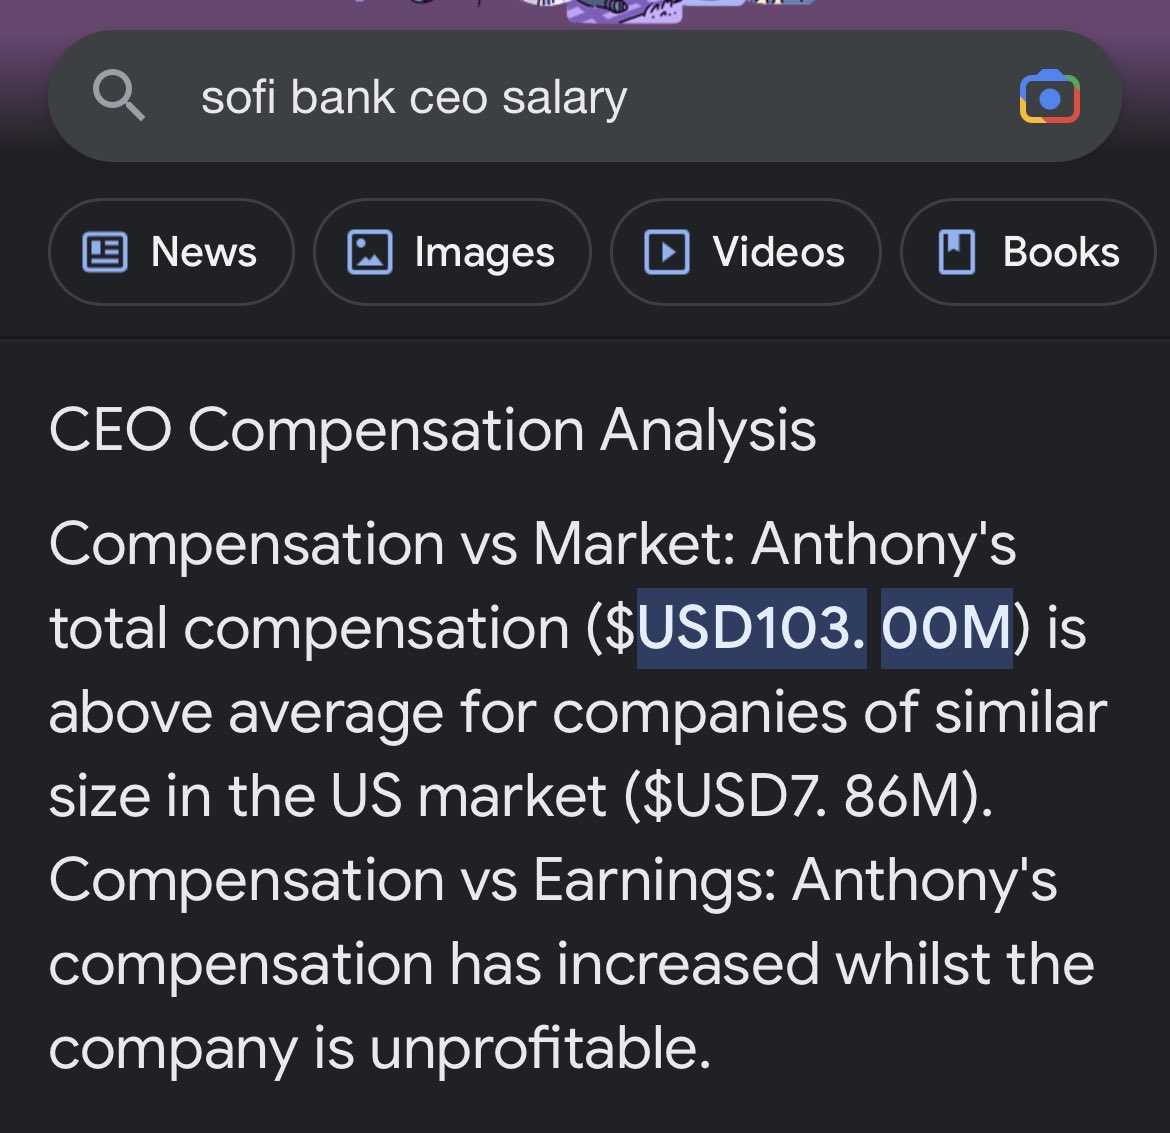 @NBCNews Yet, the CEO of @SoFi’s total compensation package is $103 million. 

execpay.org/news/sofi-tech…